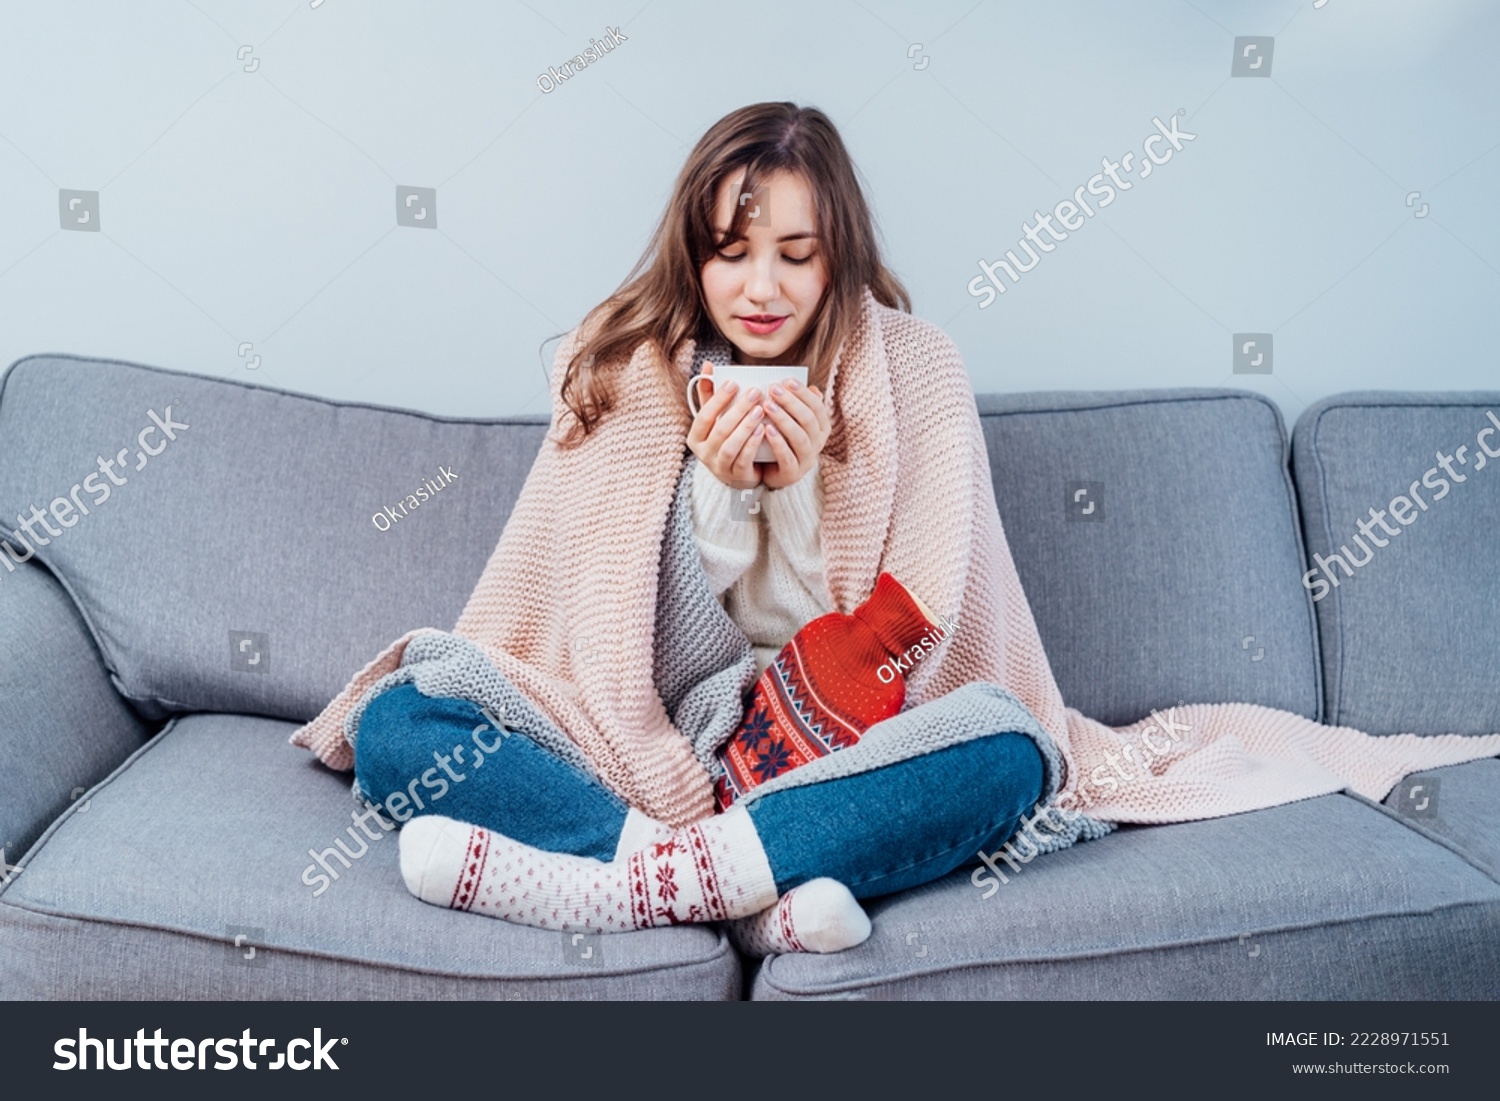 Woman freezes in wintertime. Young girl wearing warm woolen socks and wrapped into two blankets, holding a cup of hot drink and heating pad while sitting on sofa at home. Keep warm. Selective focus. #2228971551